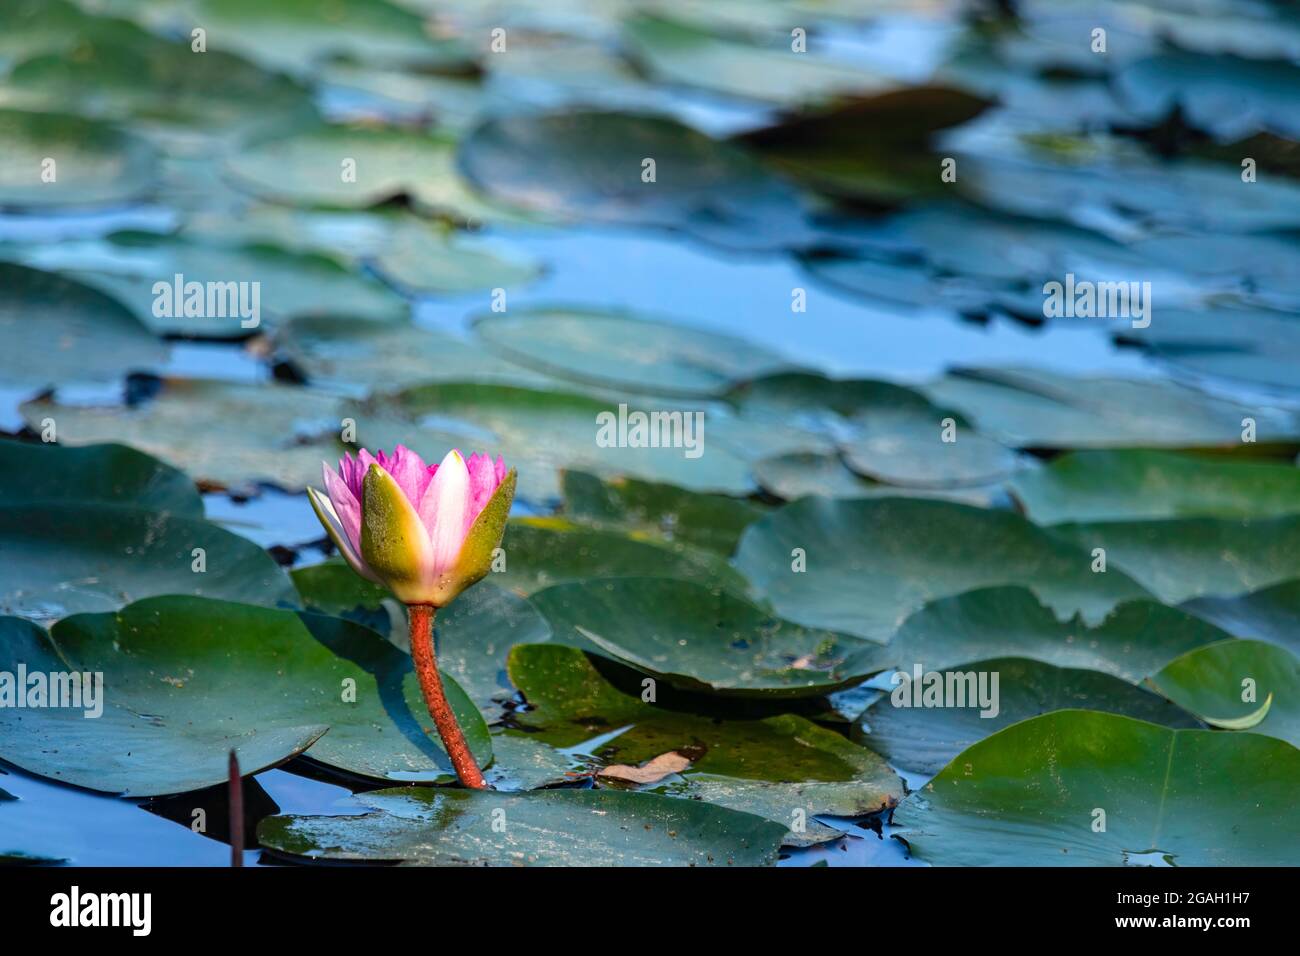 Closeup view of water lily flower against green leaves background Stock Photo